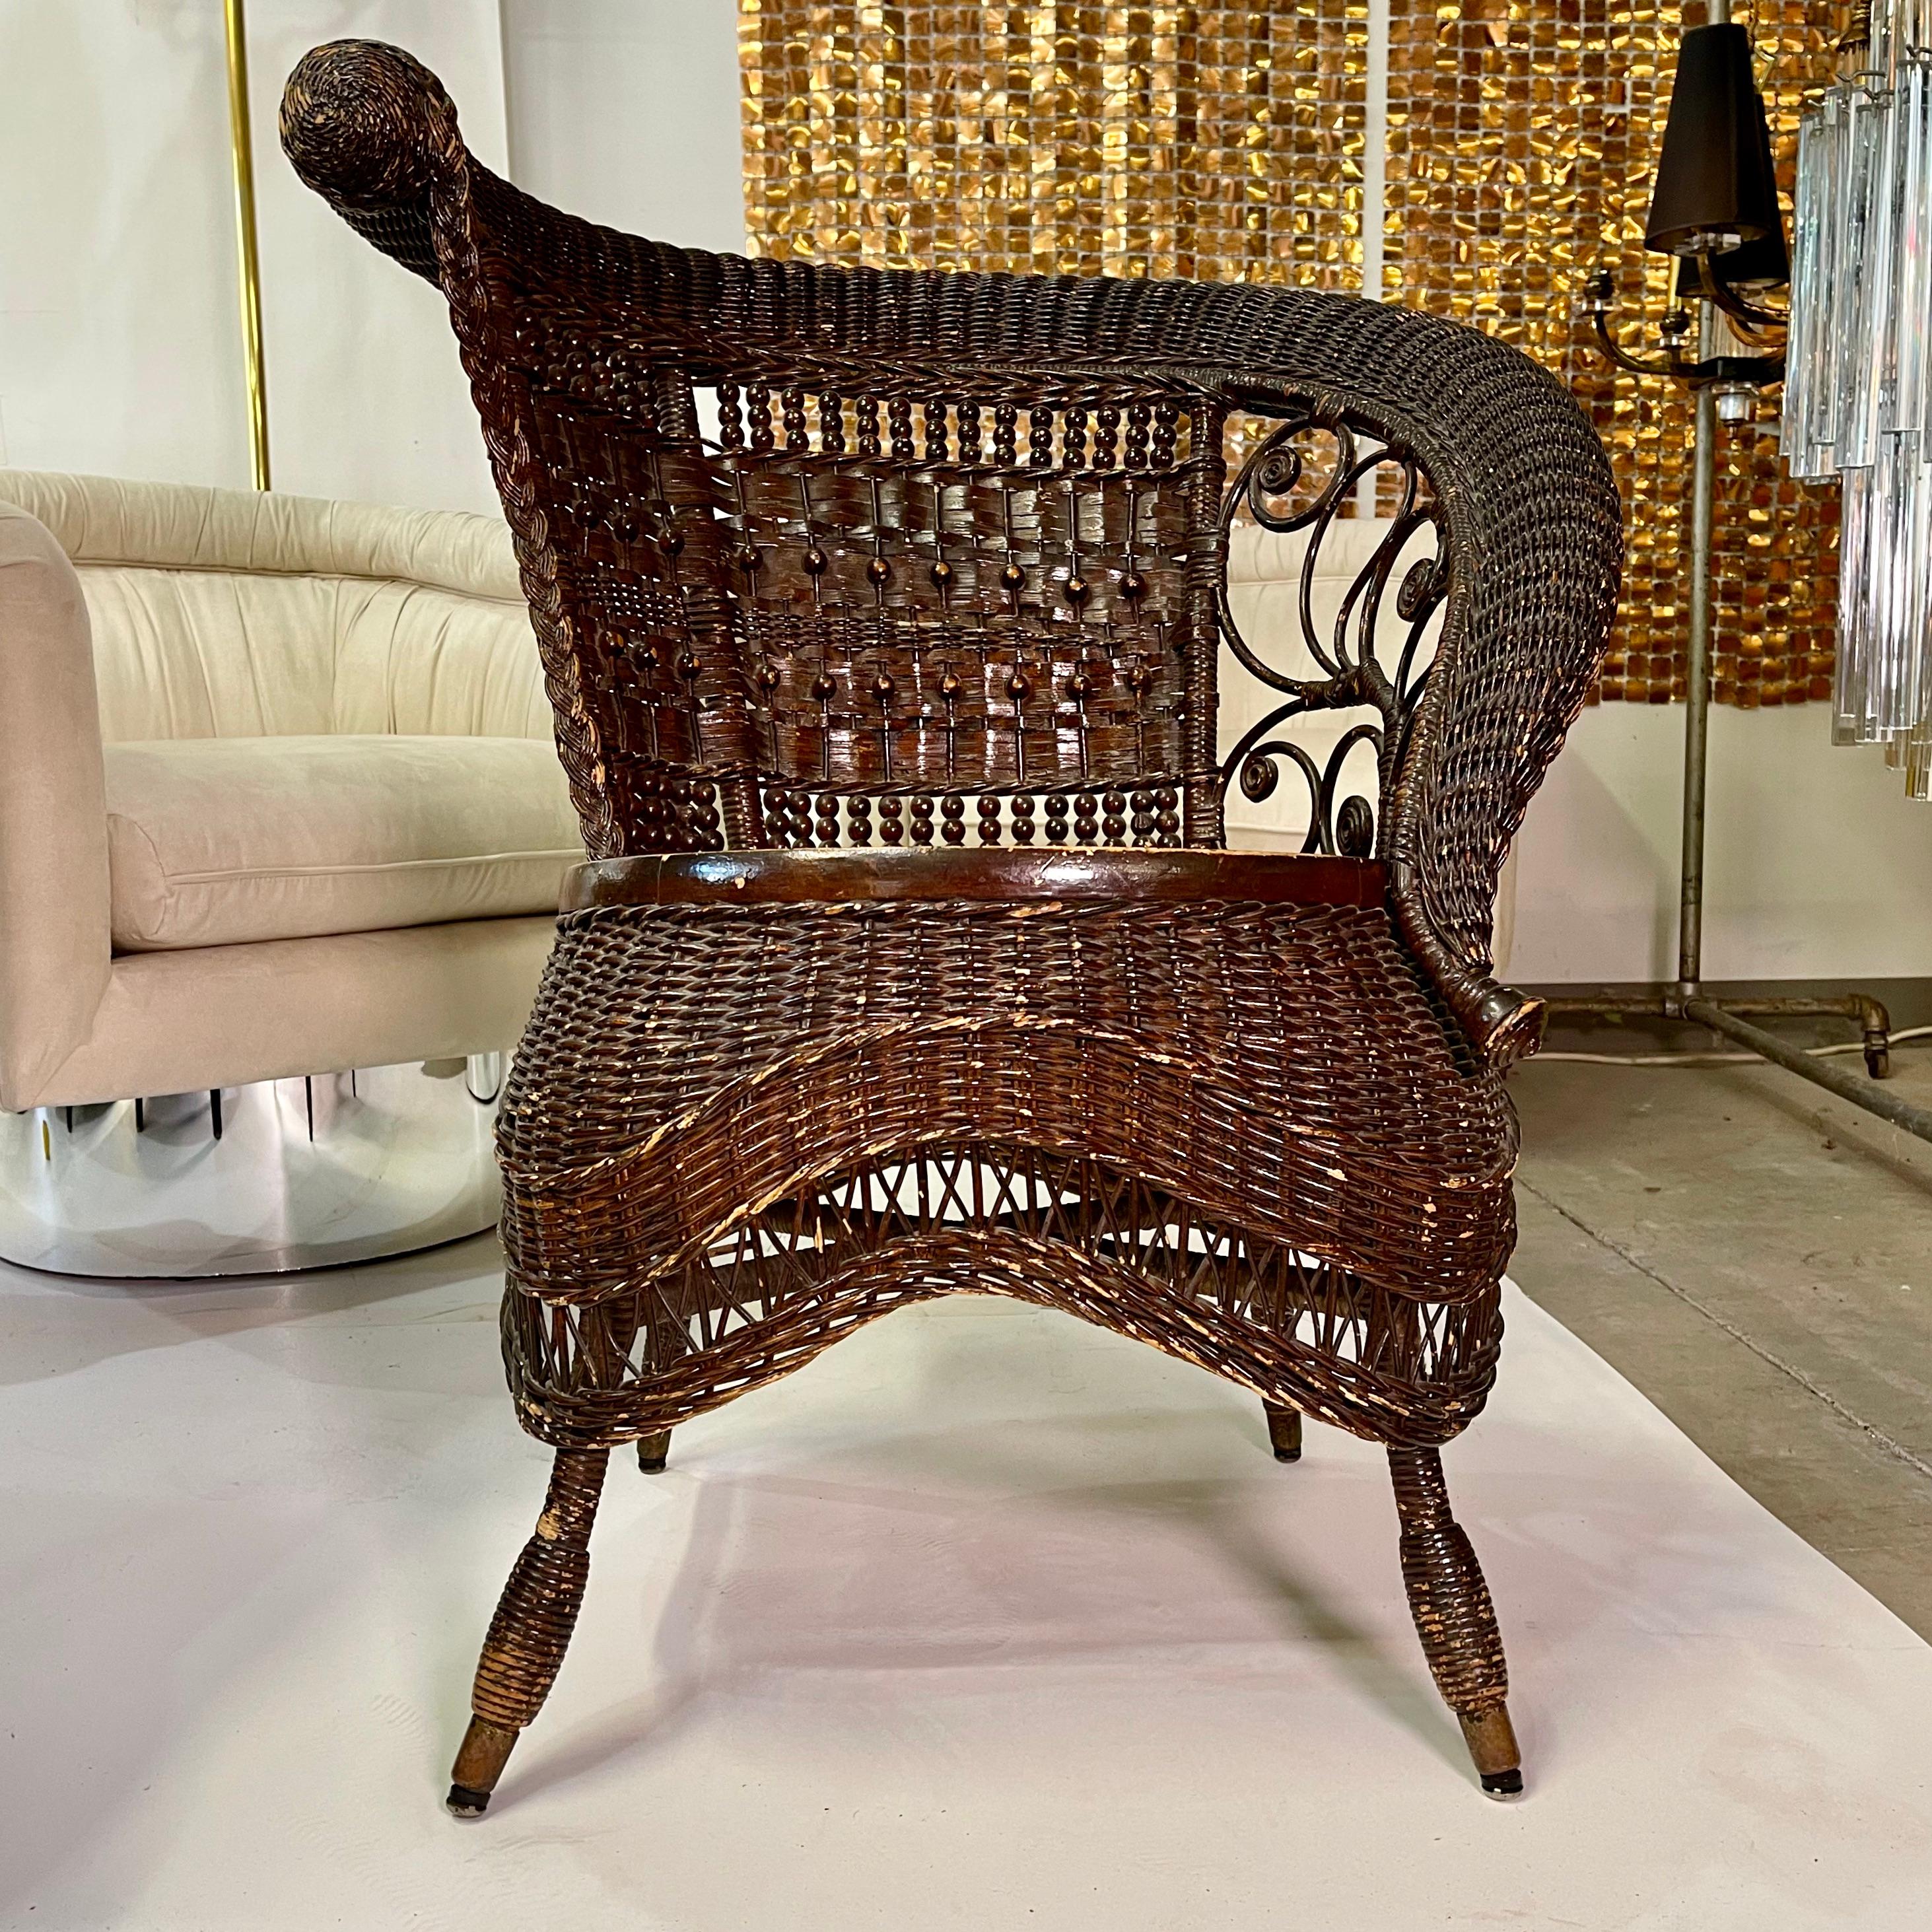 Jenkins & Phipps stick and ball wicker photographers or portrait chair with asymmetrical scrolled right arm and fiddleheads, woven skirt, and woven beaded front legs. 
Jenkins-Phipps label on underside, dating this chair from between 1903 and